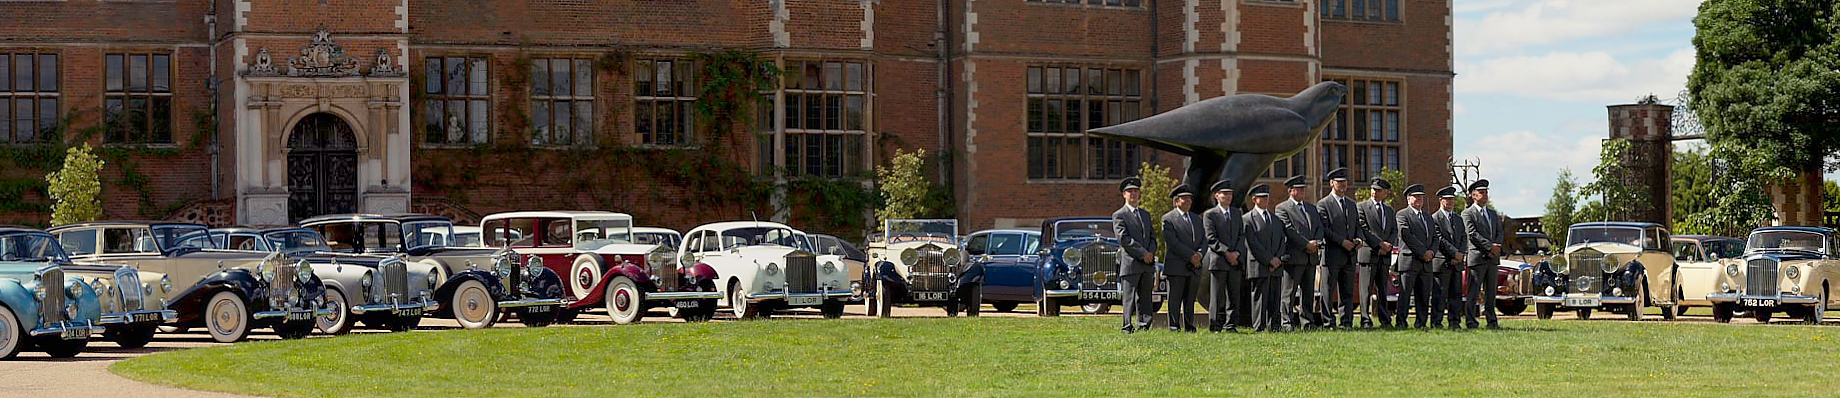 Chauffeurs wearing full grey uniform and hat in front of a selection of classic cars.